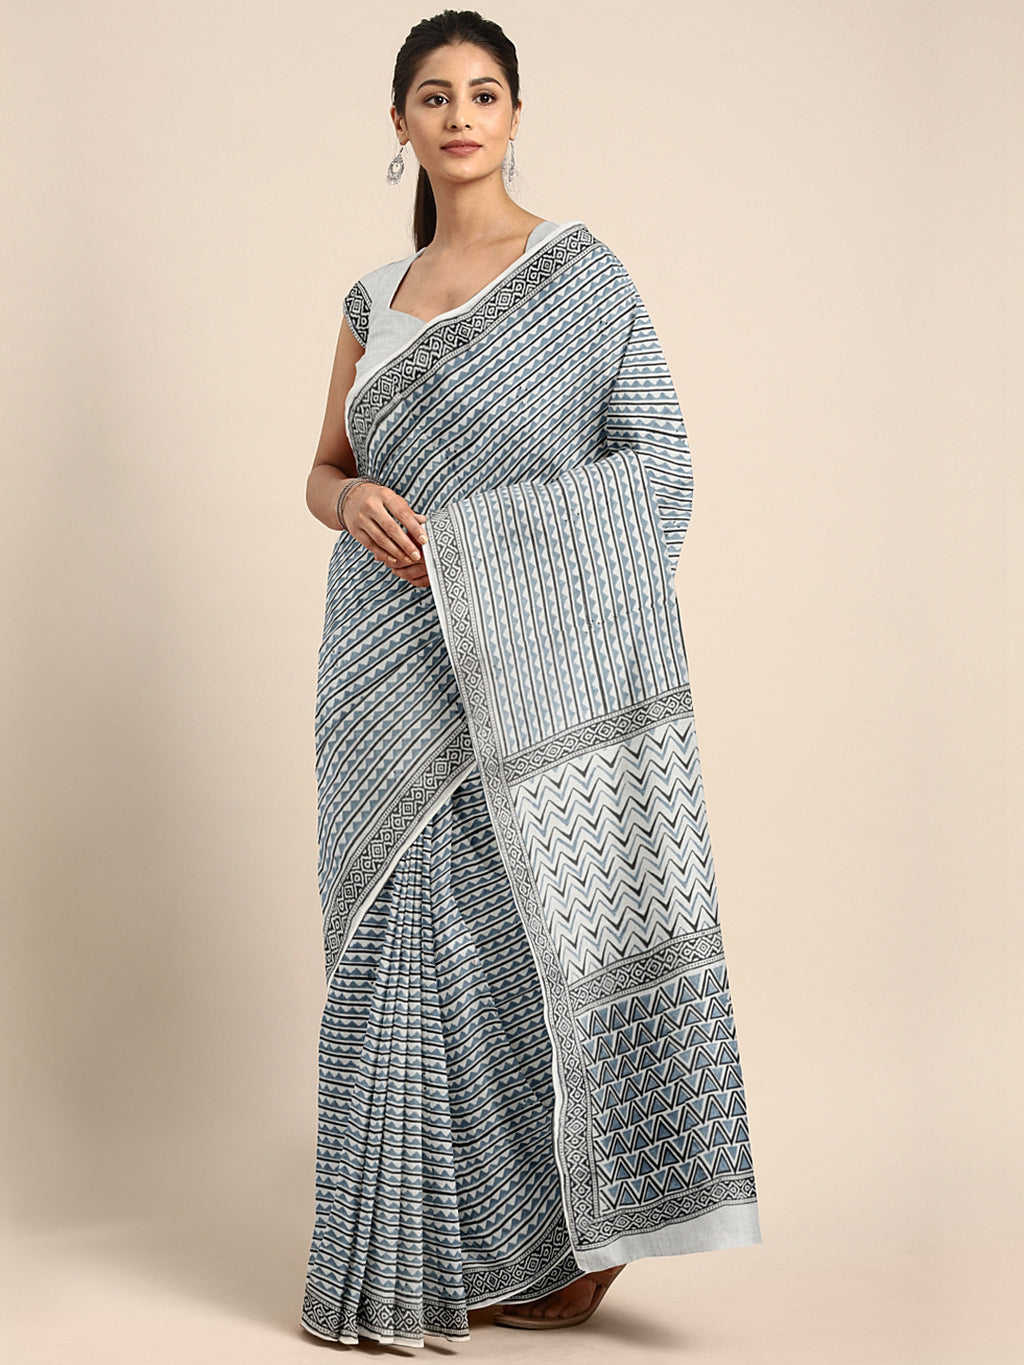 Blue & White Striped Mud Resist Hand block Print Handcrafted Cotton Saree-Saree-Kalakari India-BAPASA0087-Cotton, Dabu, Geographical Indication, Hand Blocks, Hand Crafted, Heritage Prints, Sarees, Sustainable Fabrics-[Linen,Ethnic,wear,Fashionista,Handloom,Handicraft,Indigo,blockprint,block,print,Cotton,Chanderi,Blue, latest,classy,party,bollywood,trendy,summer,style,traditional,formal,elegant,unique,style,hand,block,print, dabu,booti,gift,present,glamorous,affordable,collectible,Sari,Saree,prin